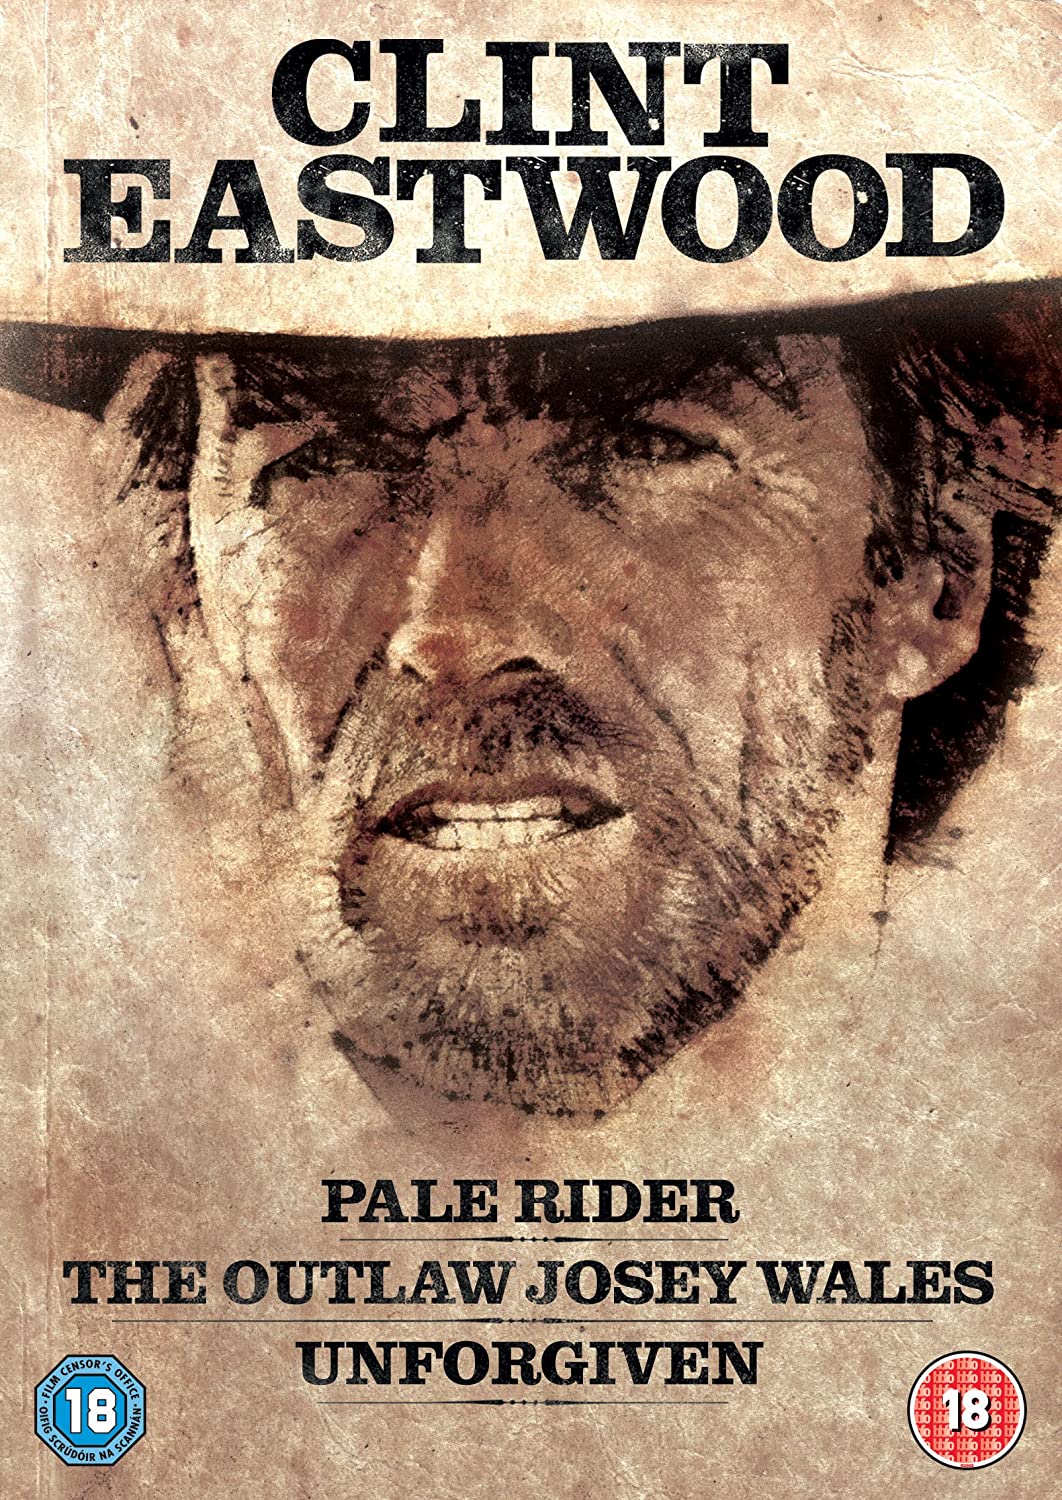 Clint Eastwood: Westerns [Pale Rider/The Outlaw Josey Wales/Unforgiven] [Region Free]